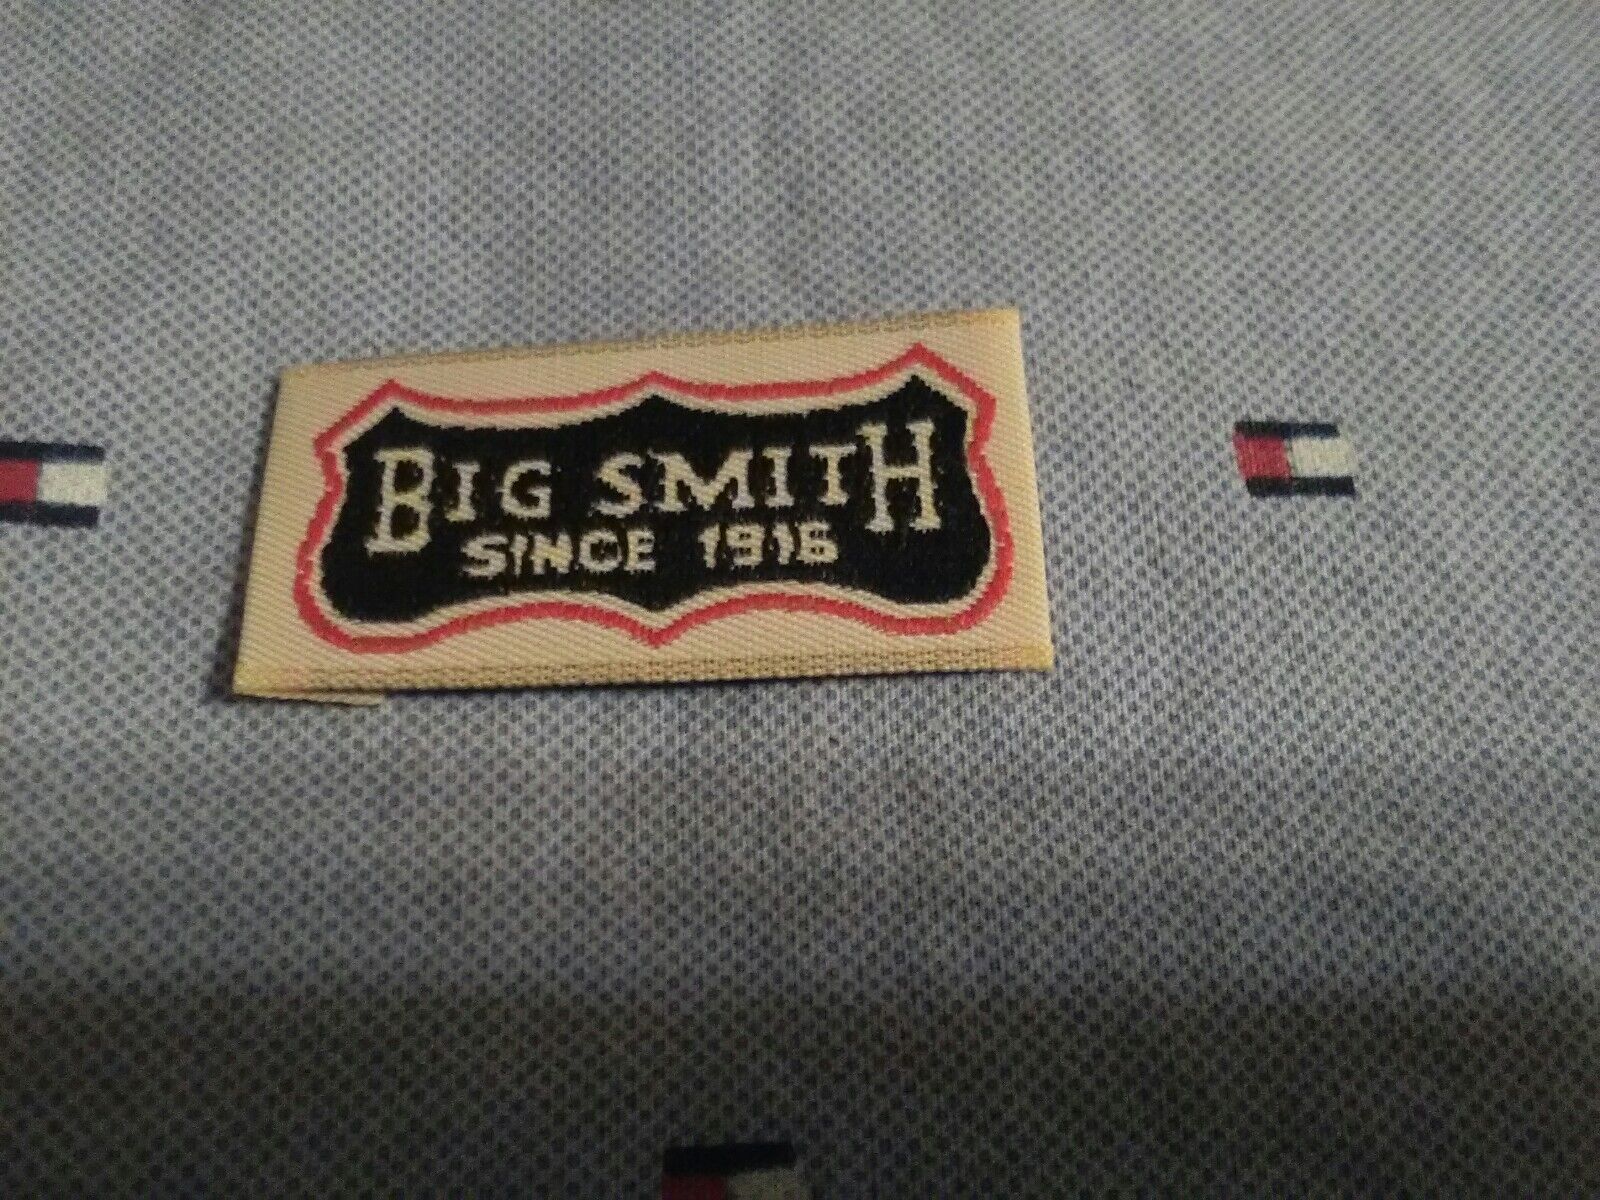 VTG NOS BIG SMITH since 1916 Clothing Tag Label Black LOGO Overall Jeans jacket